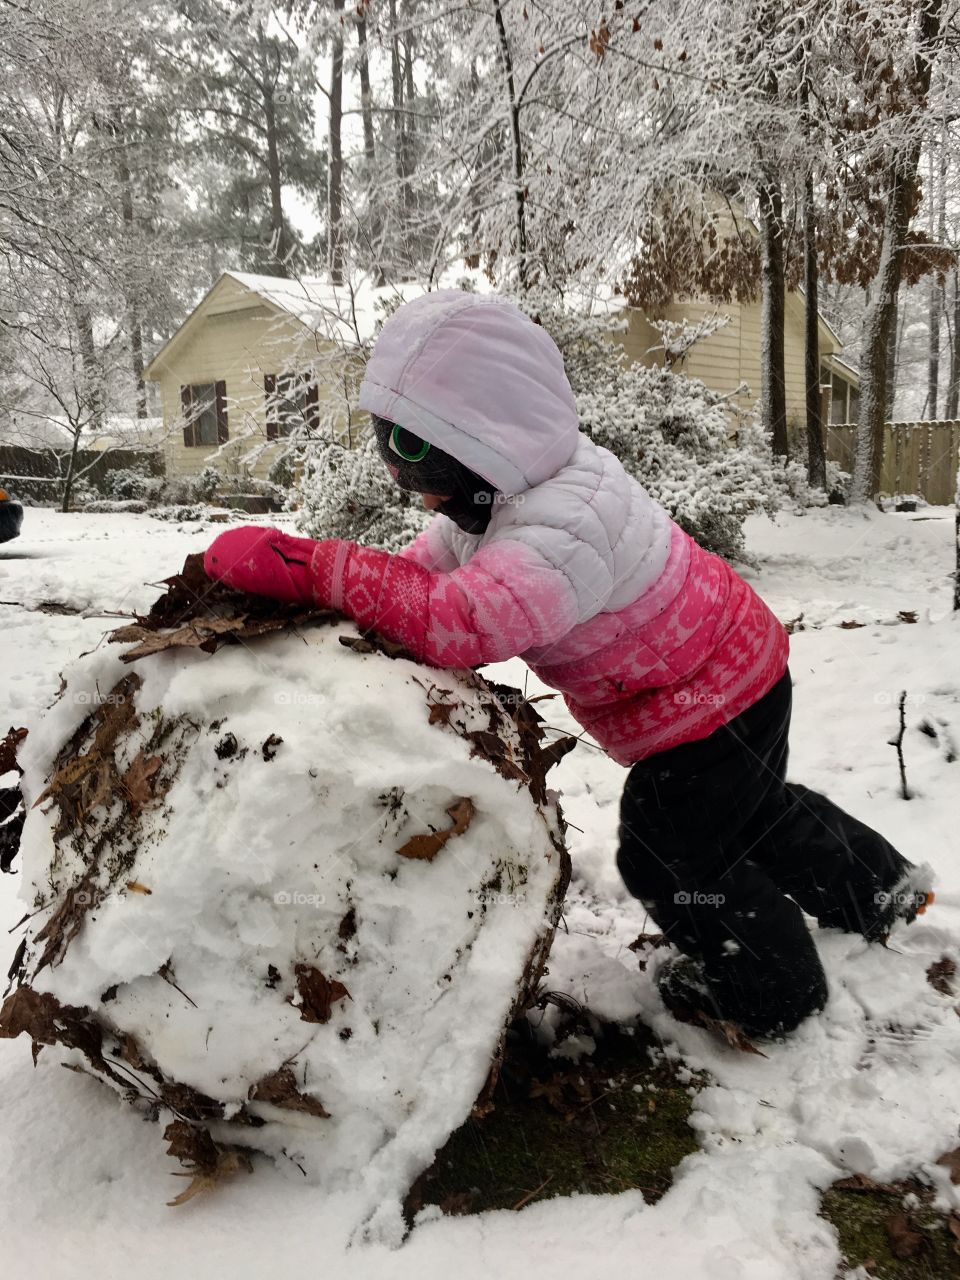 Building a snowman on an unraked yard